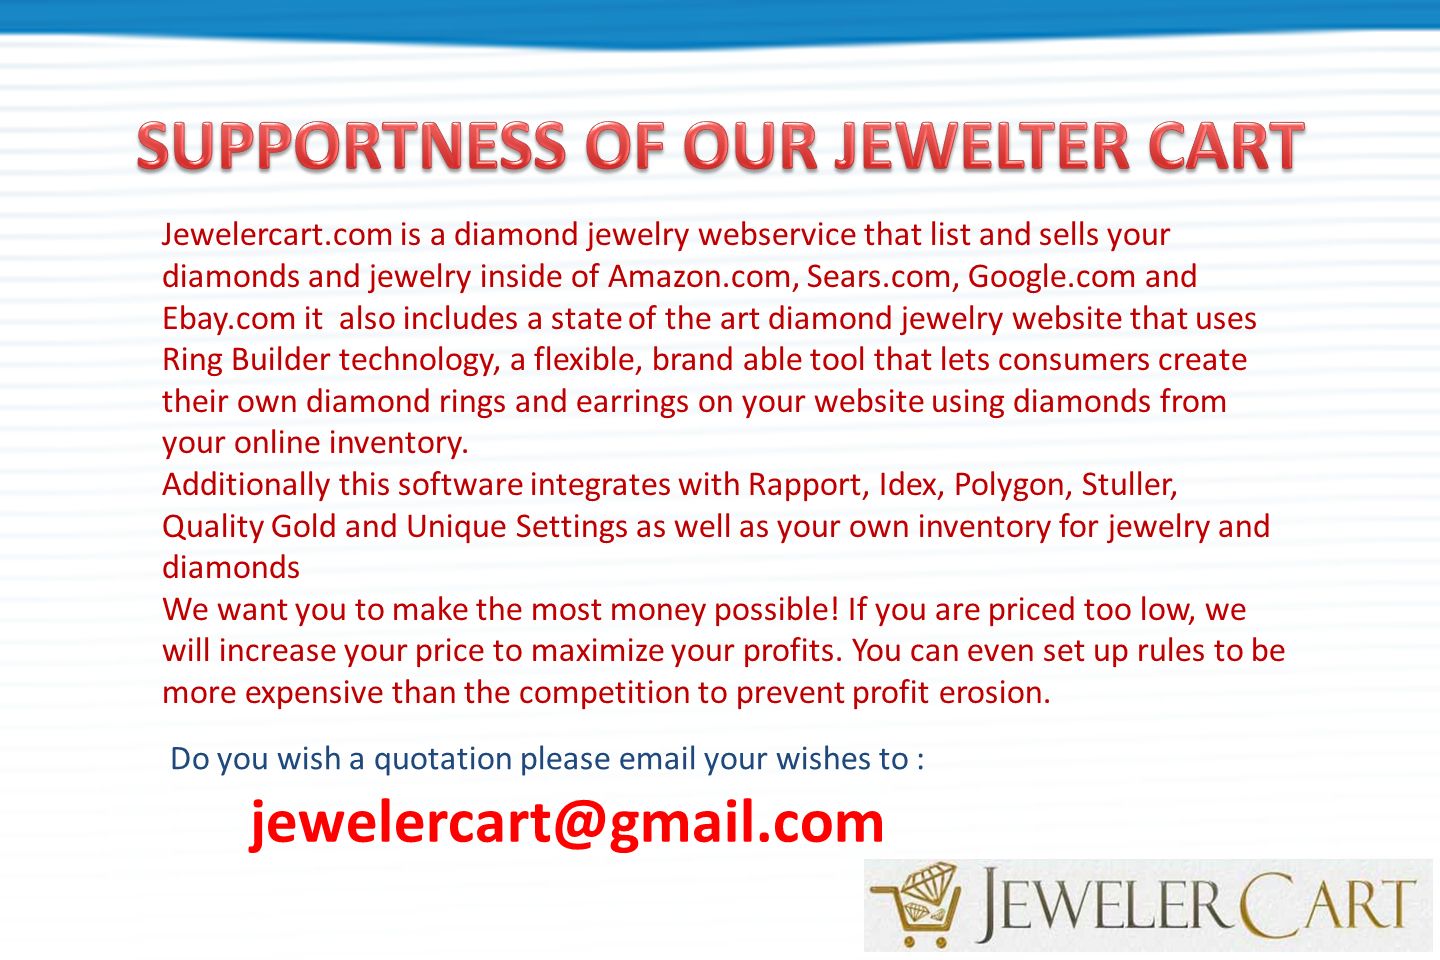 Jewelercart.com is a diamond jewelry webservice that list and sells your diamonds and jewelry inside of Amazon.com, Sears.com, Google.com and Ebay.com it also includes a state of the art diamond jewelry website that uses Ring Builder technology, a flexible, brand able tool that lets consumers create their own diamond rings and earrings on your website using diamonds from your online inventory.